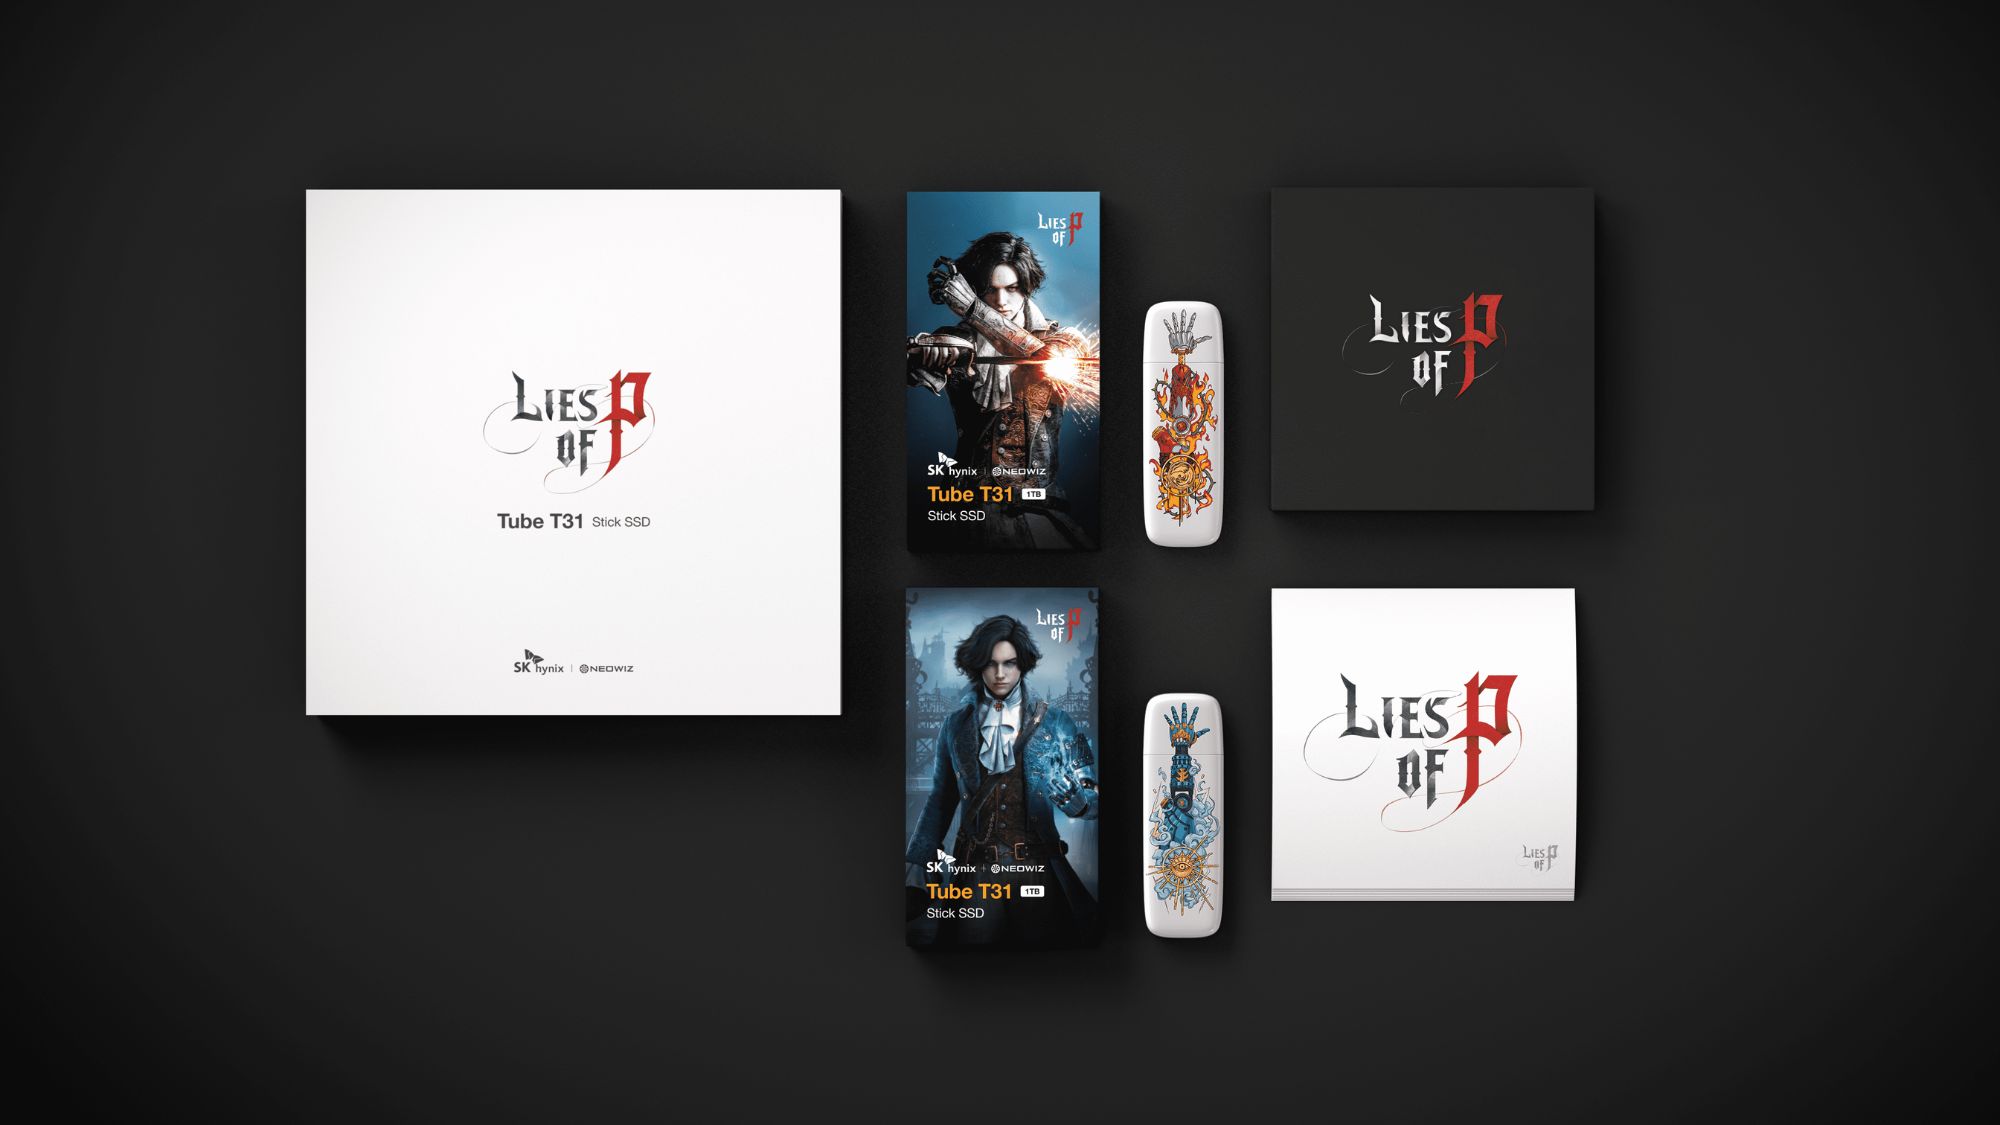  Lies of P Limited Edition SSD from SK hynix